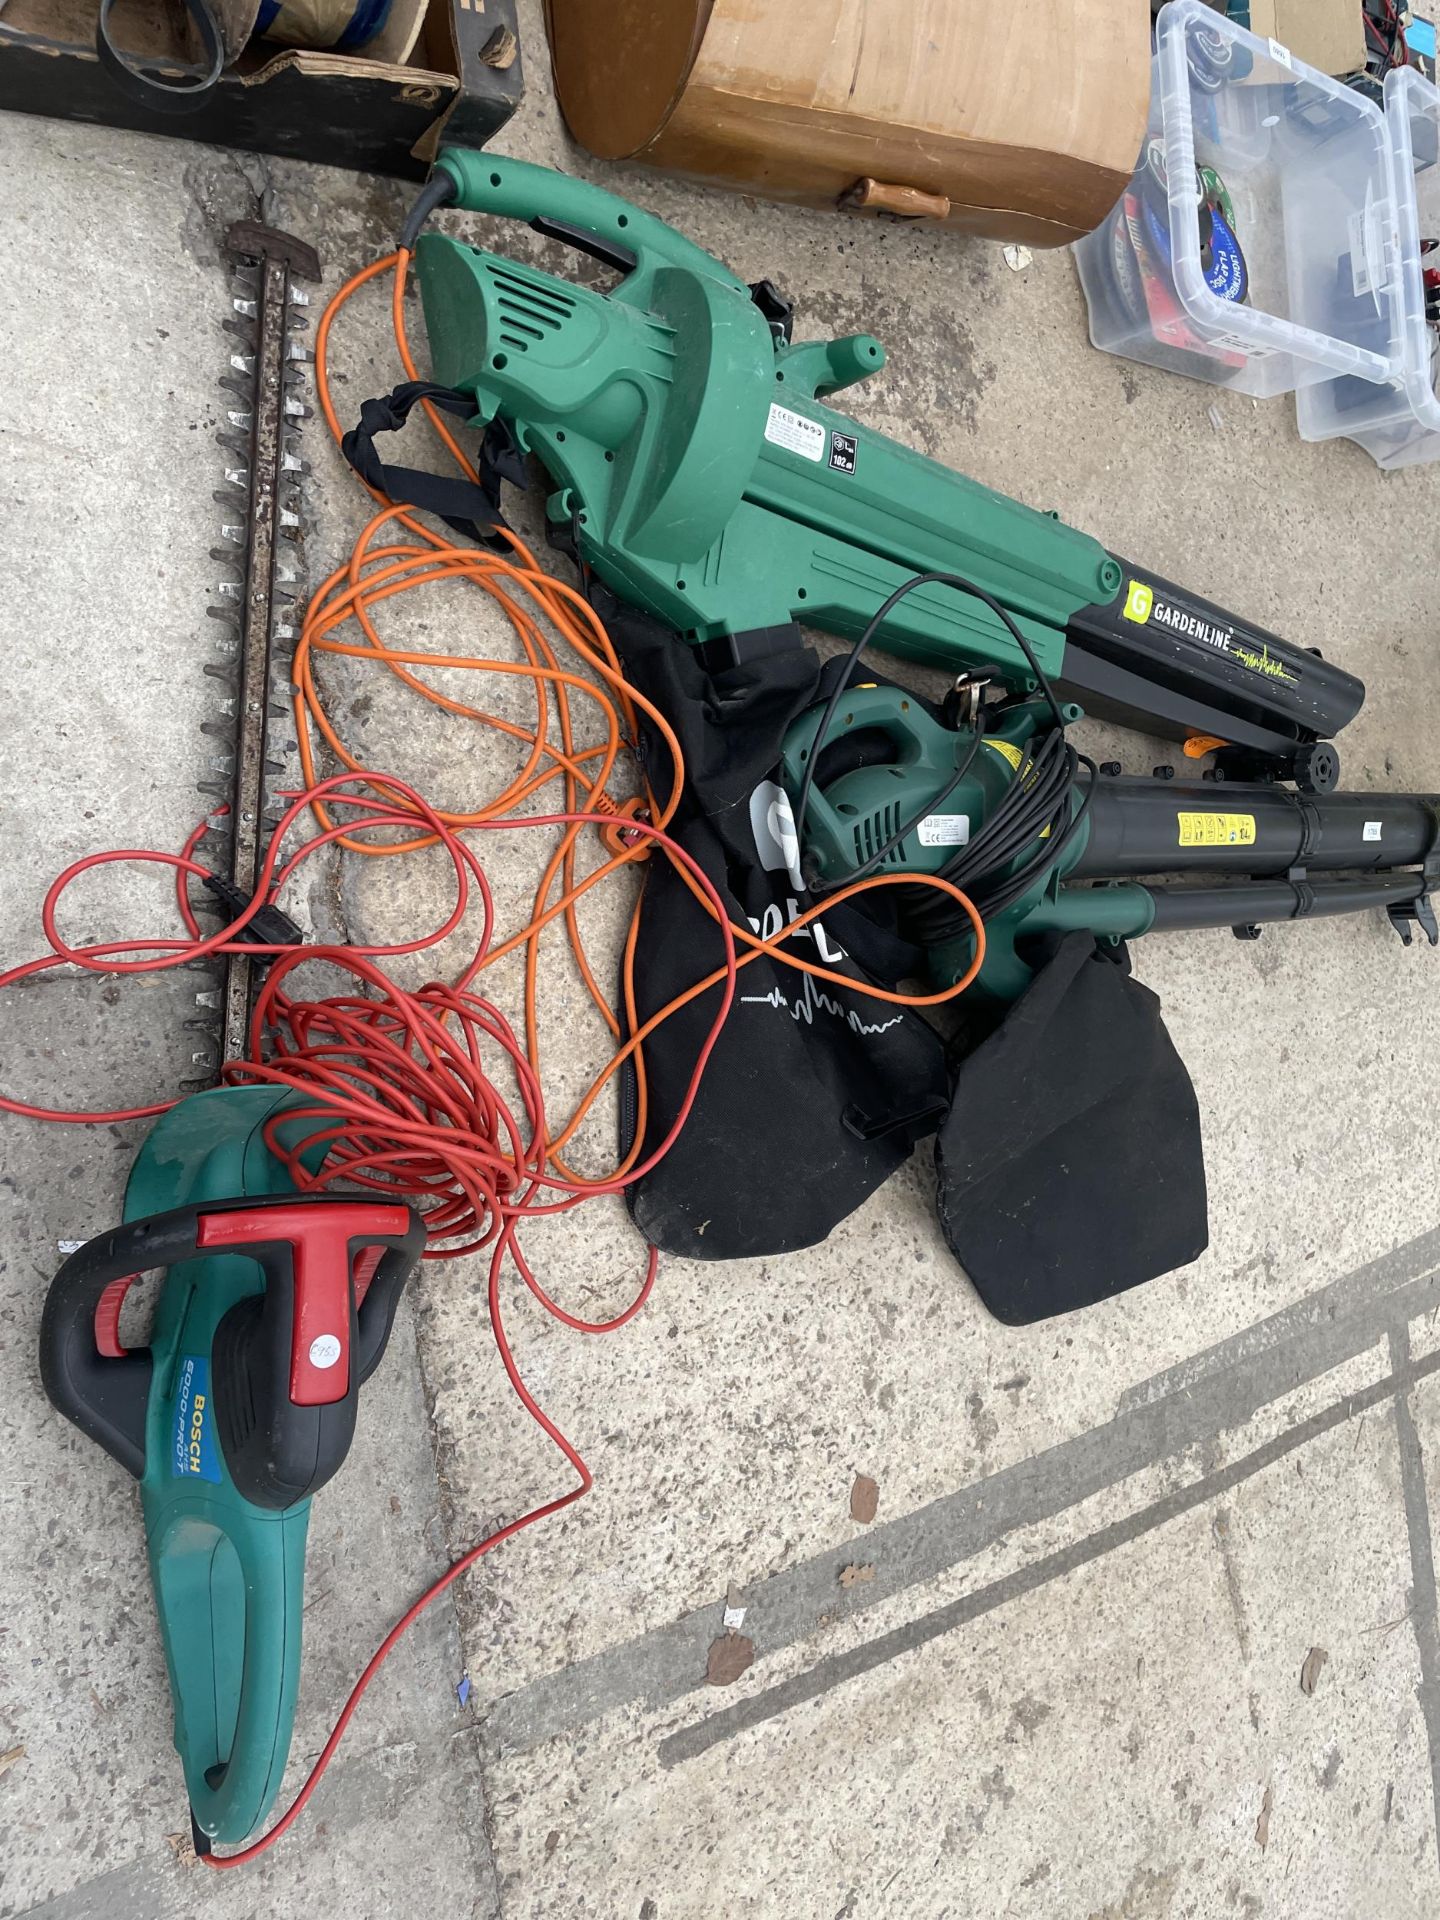 THREE ELECTRICAL GARDEN TOOLS TO INCLUDE TWO LEAF BLOWERS AND A BOSCH HEDGE TRIMMER - Image 2 of 2